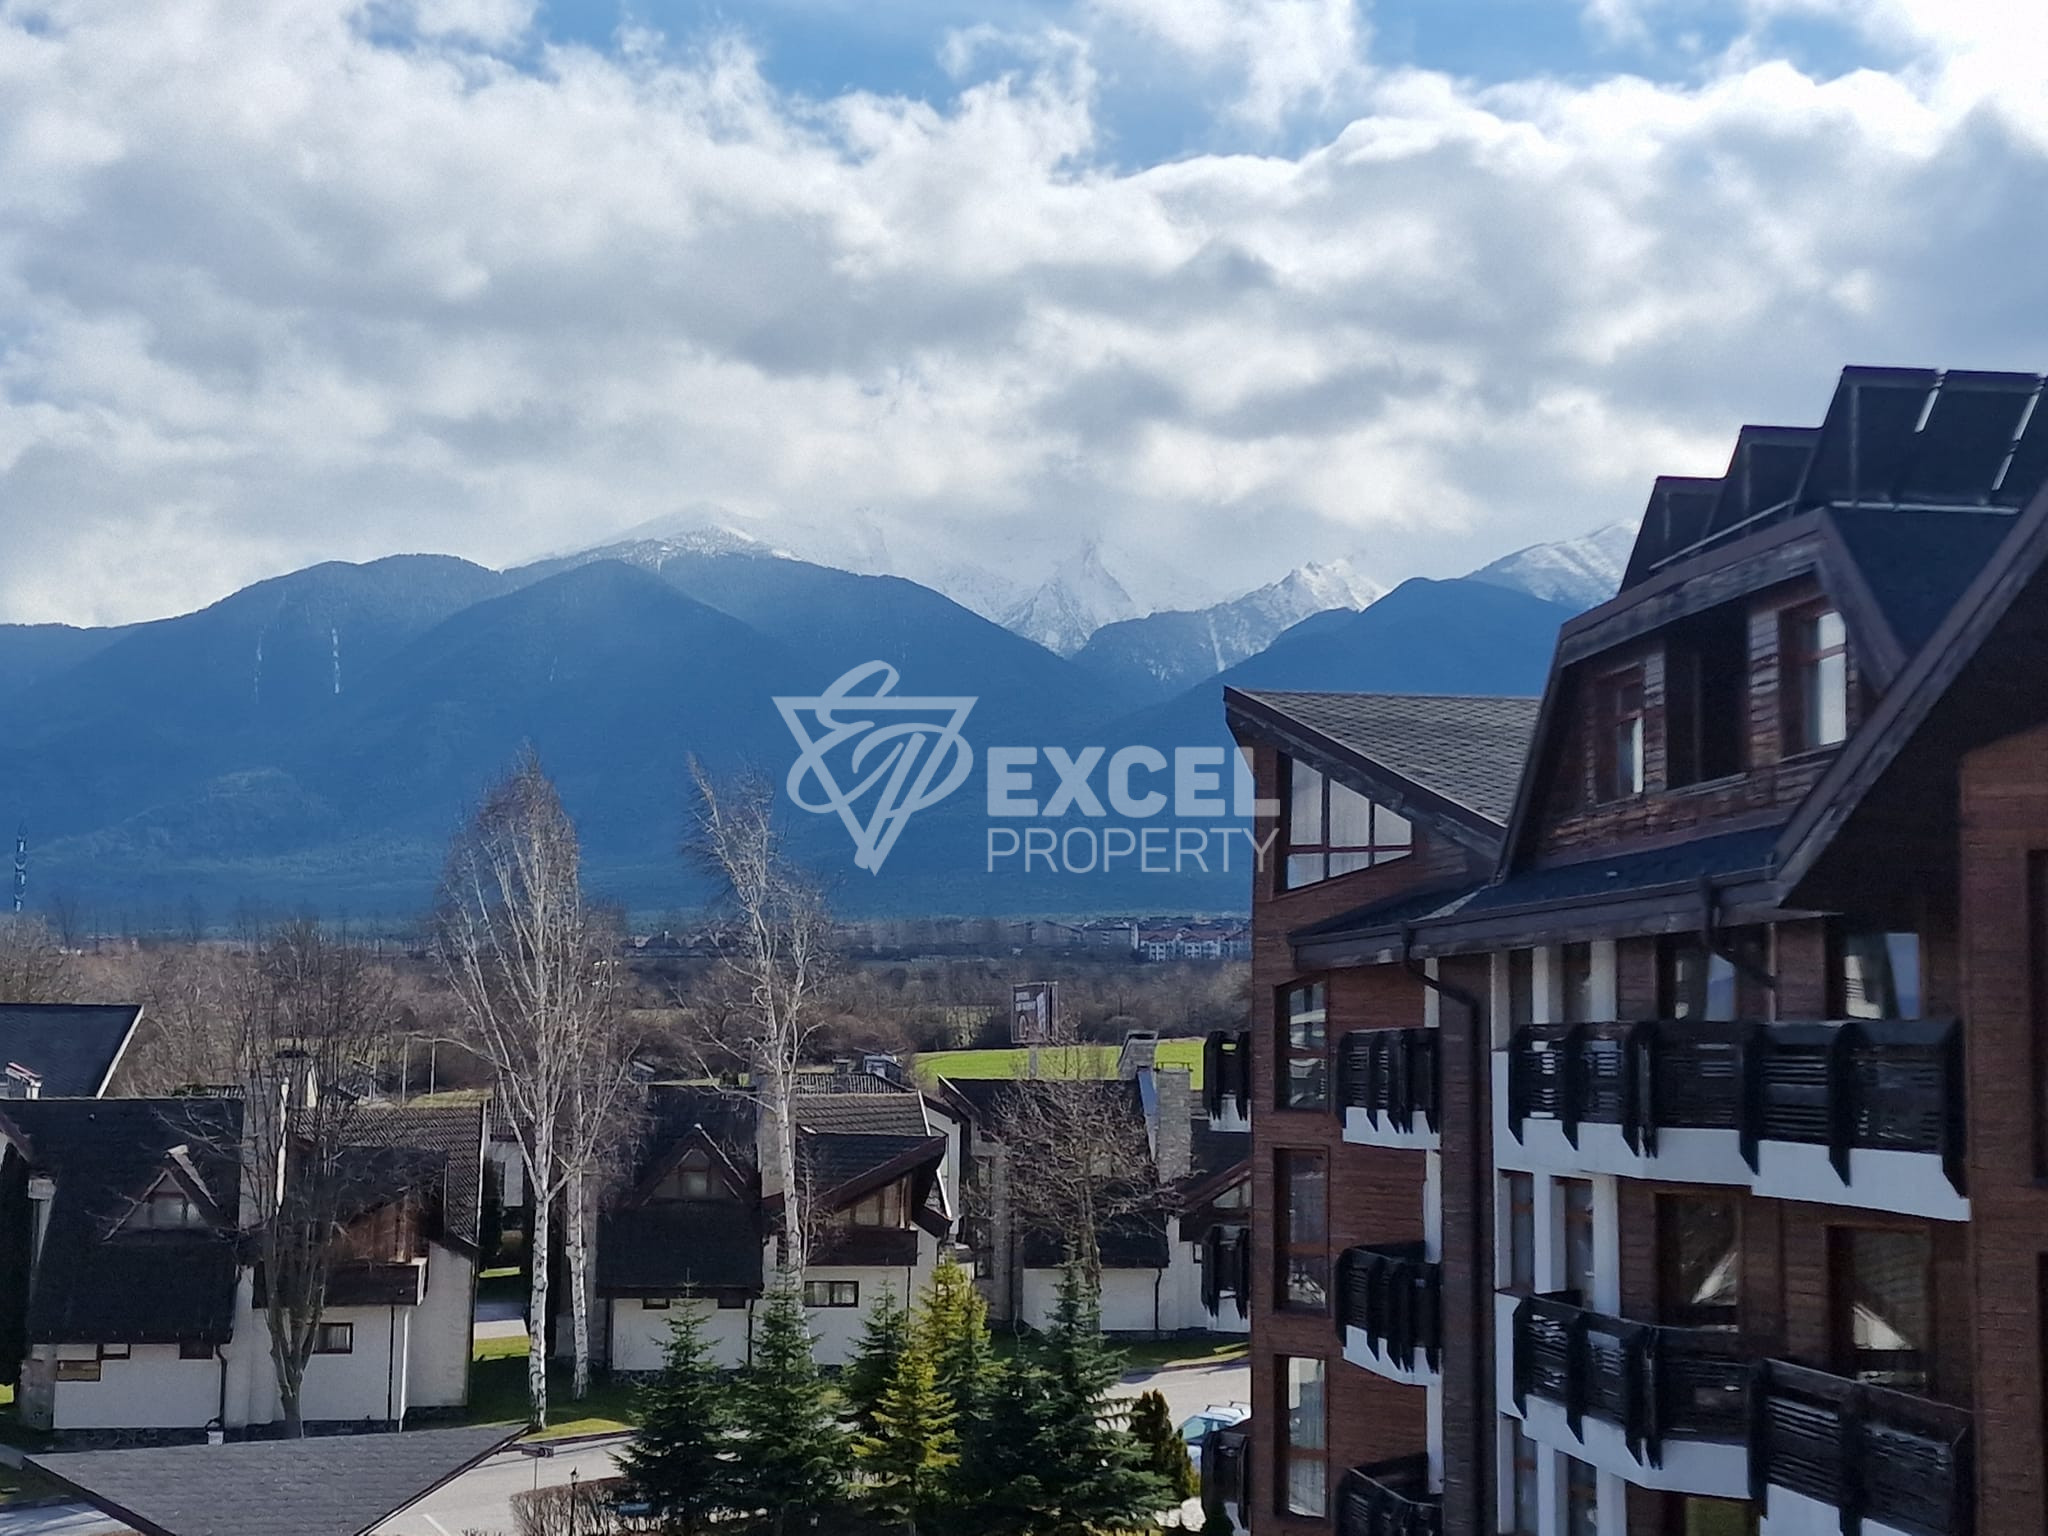 Redenka Holiday Club: one bedroom apartment with south exposure and beautiful mountain view for sale near Bansko and Razlog